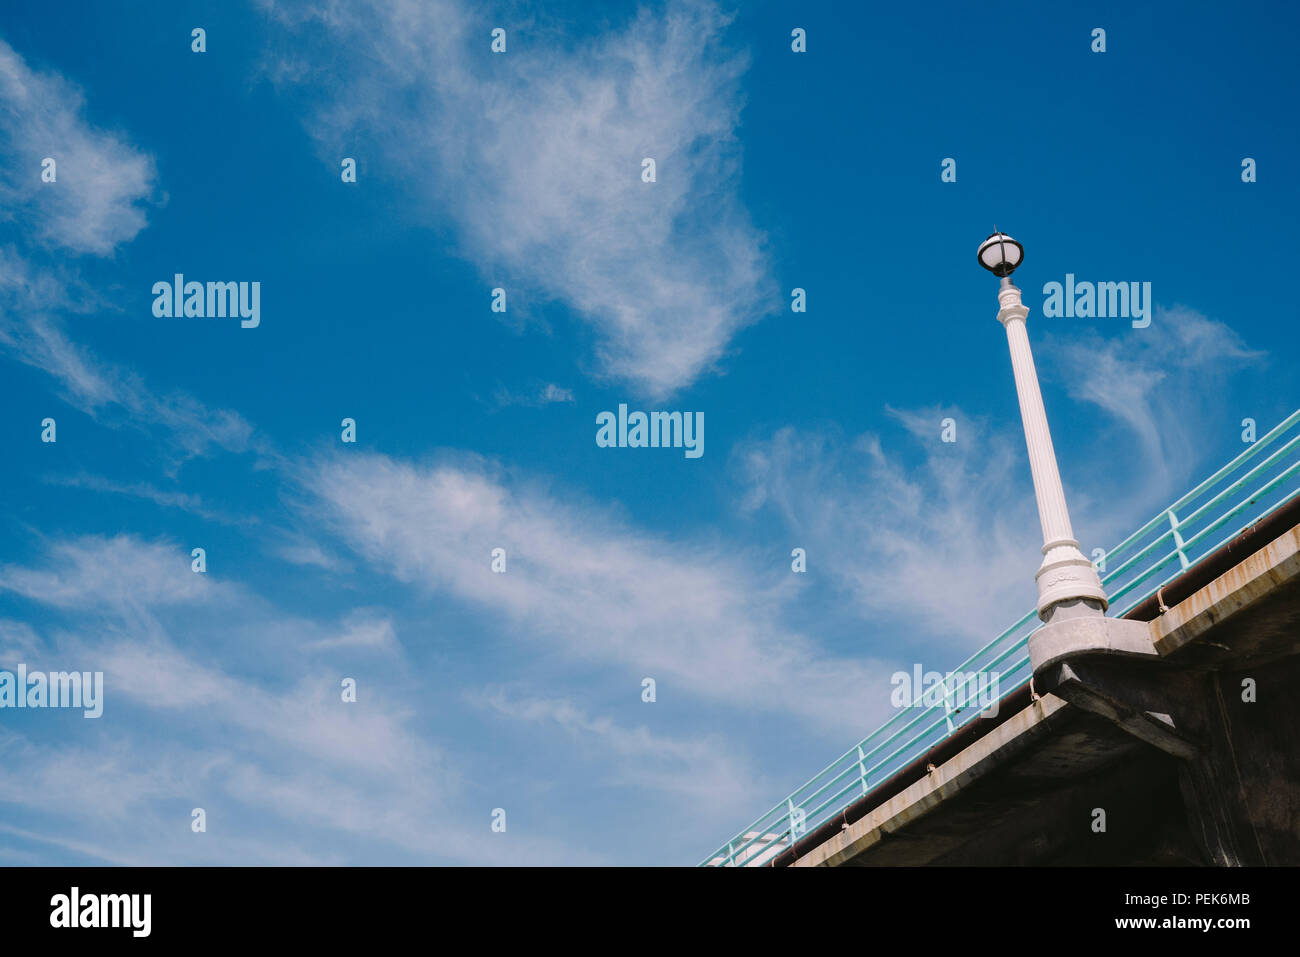 Lamp post on the pier with sky Stock Photo